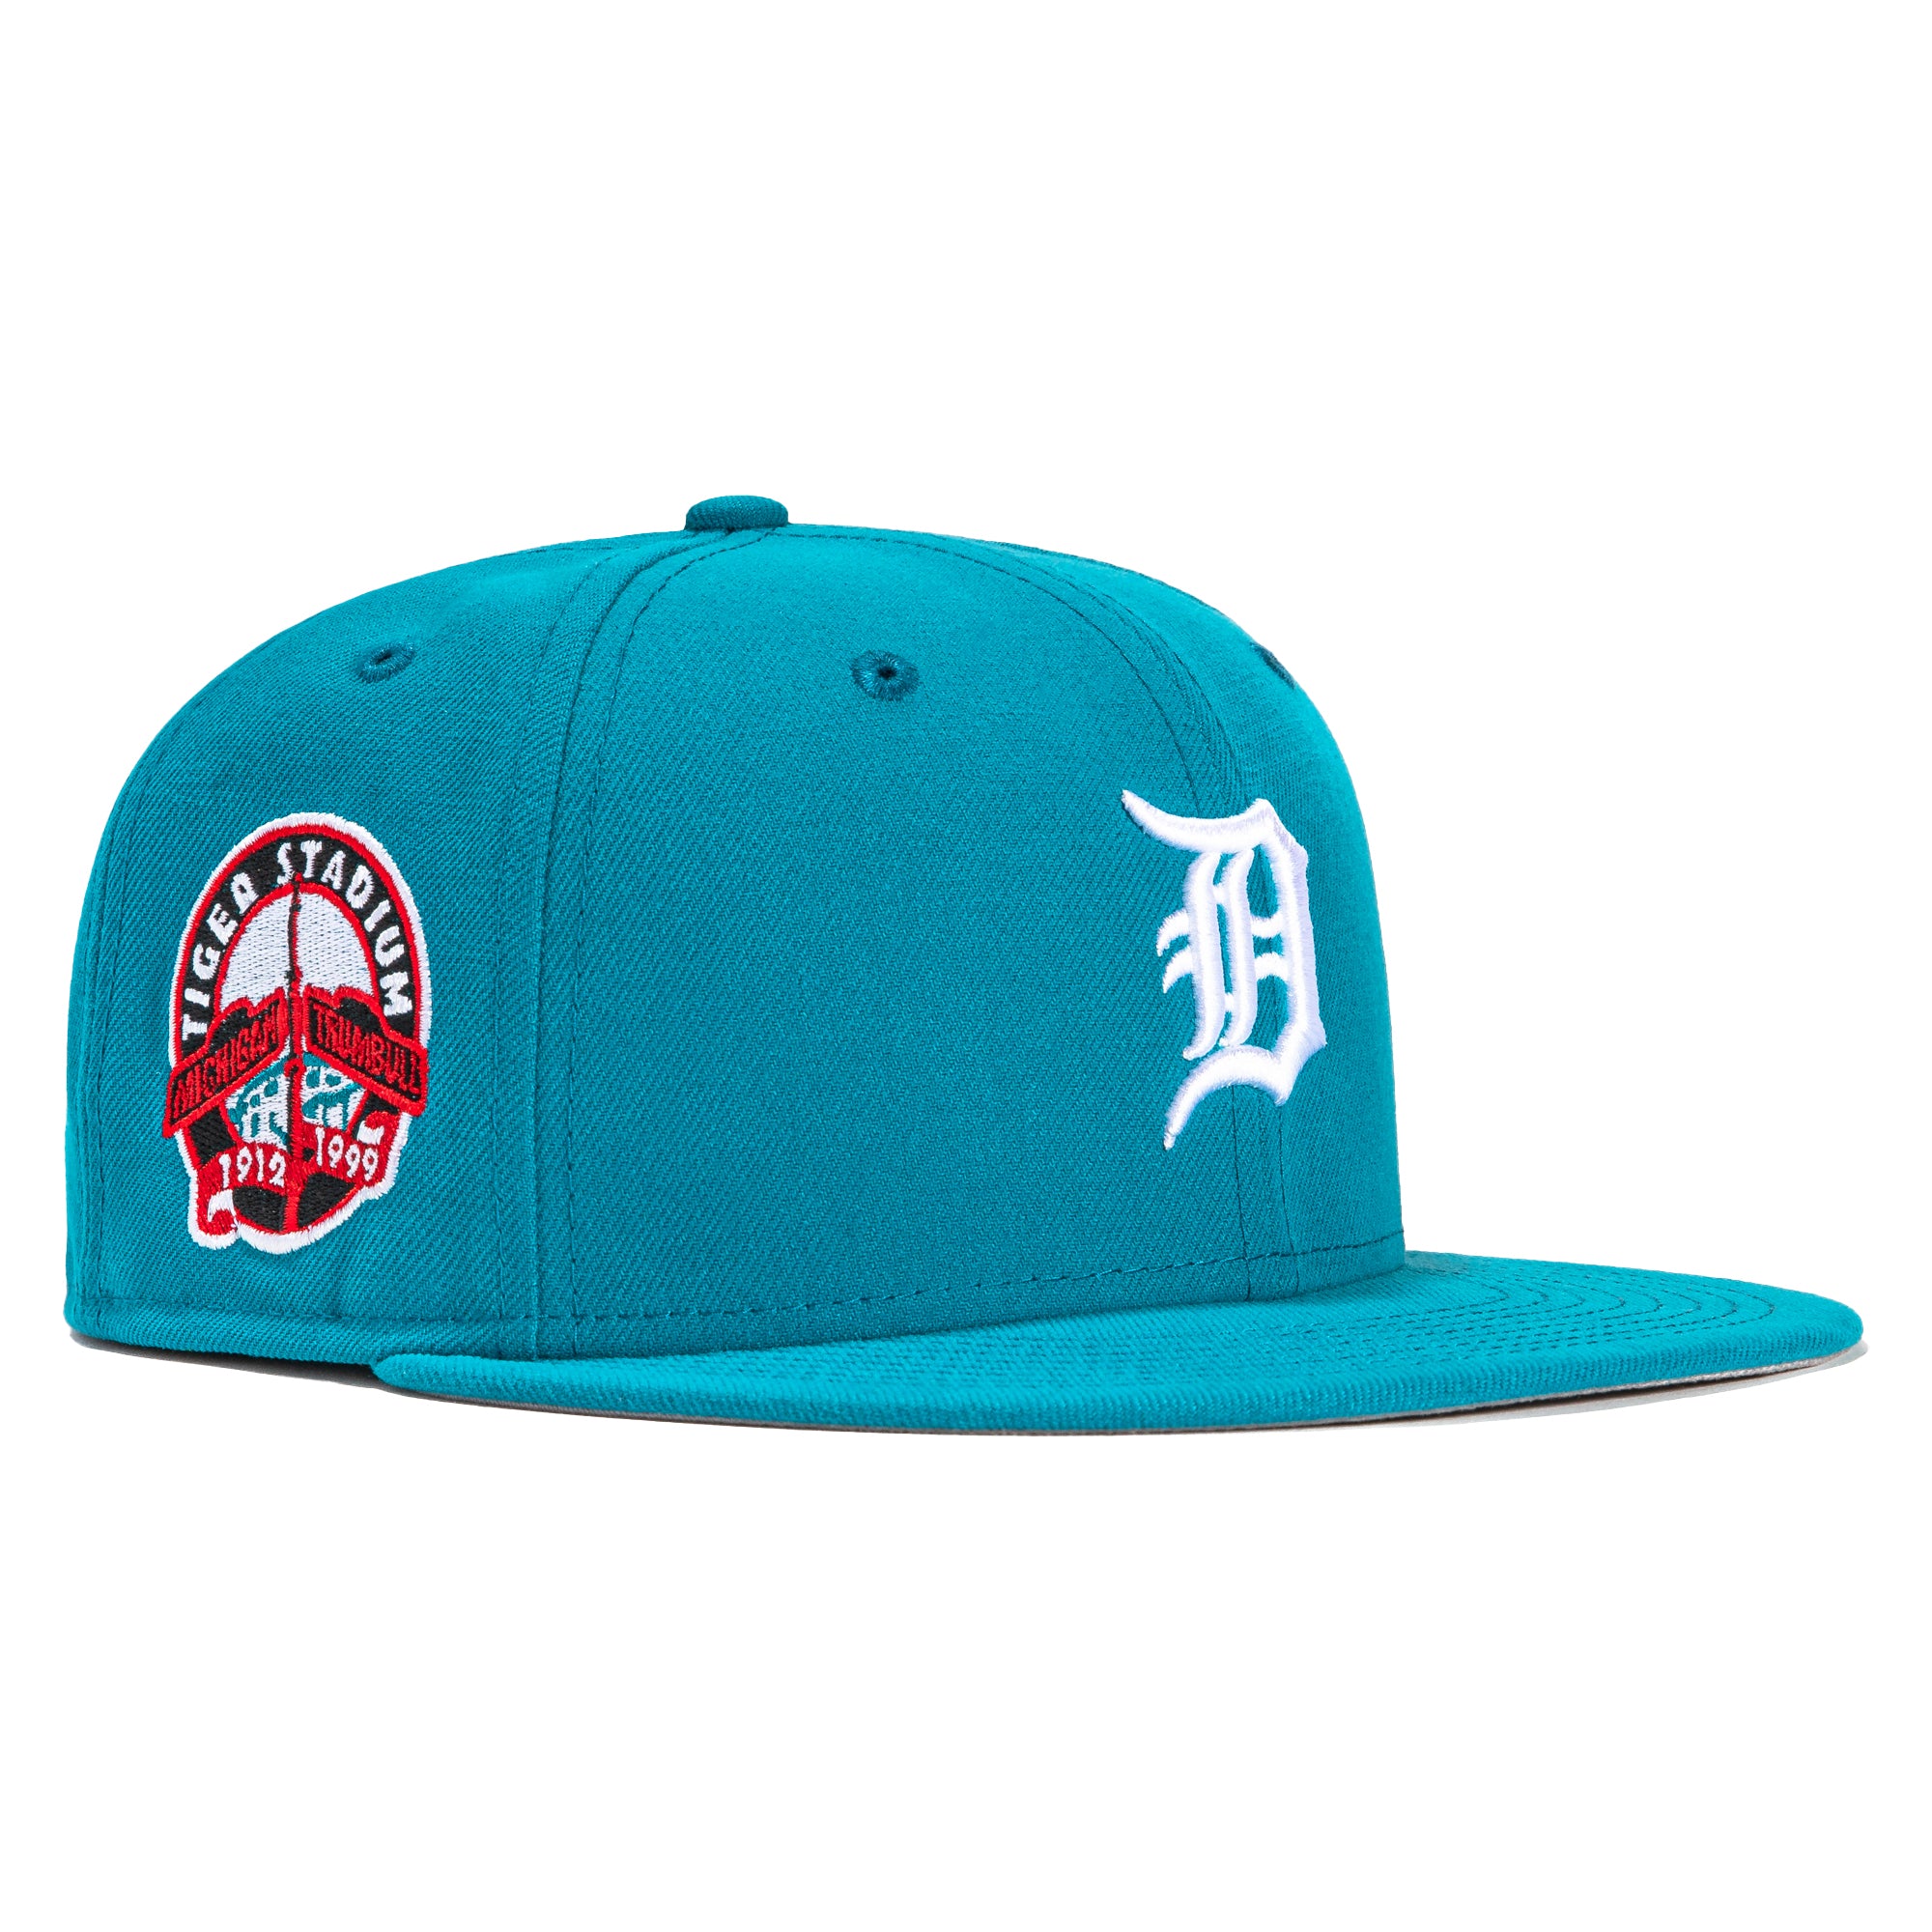 New Era 59FIFTY Building Blocks Detroit Tigers Stadium Patch Hat - Teal Teal / 7 7/8